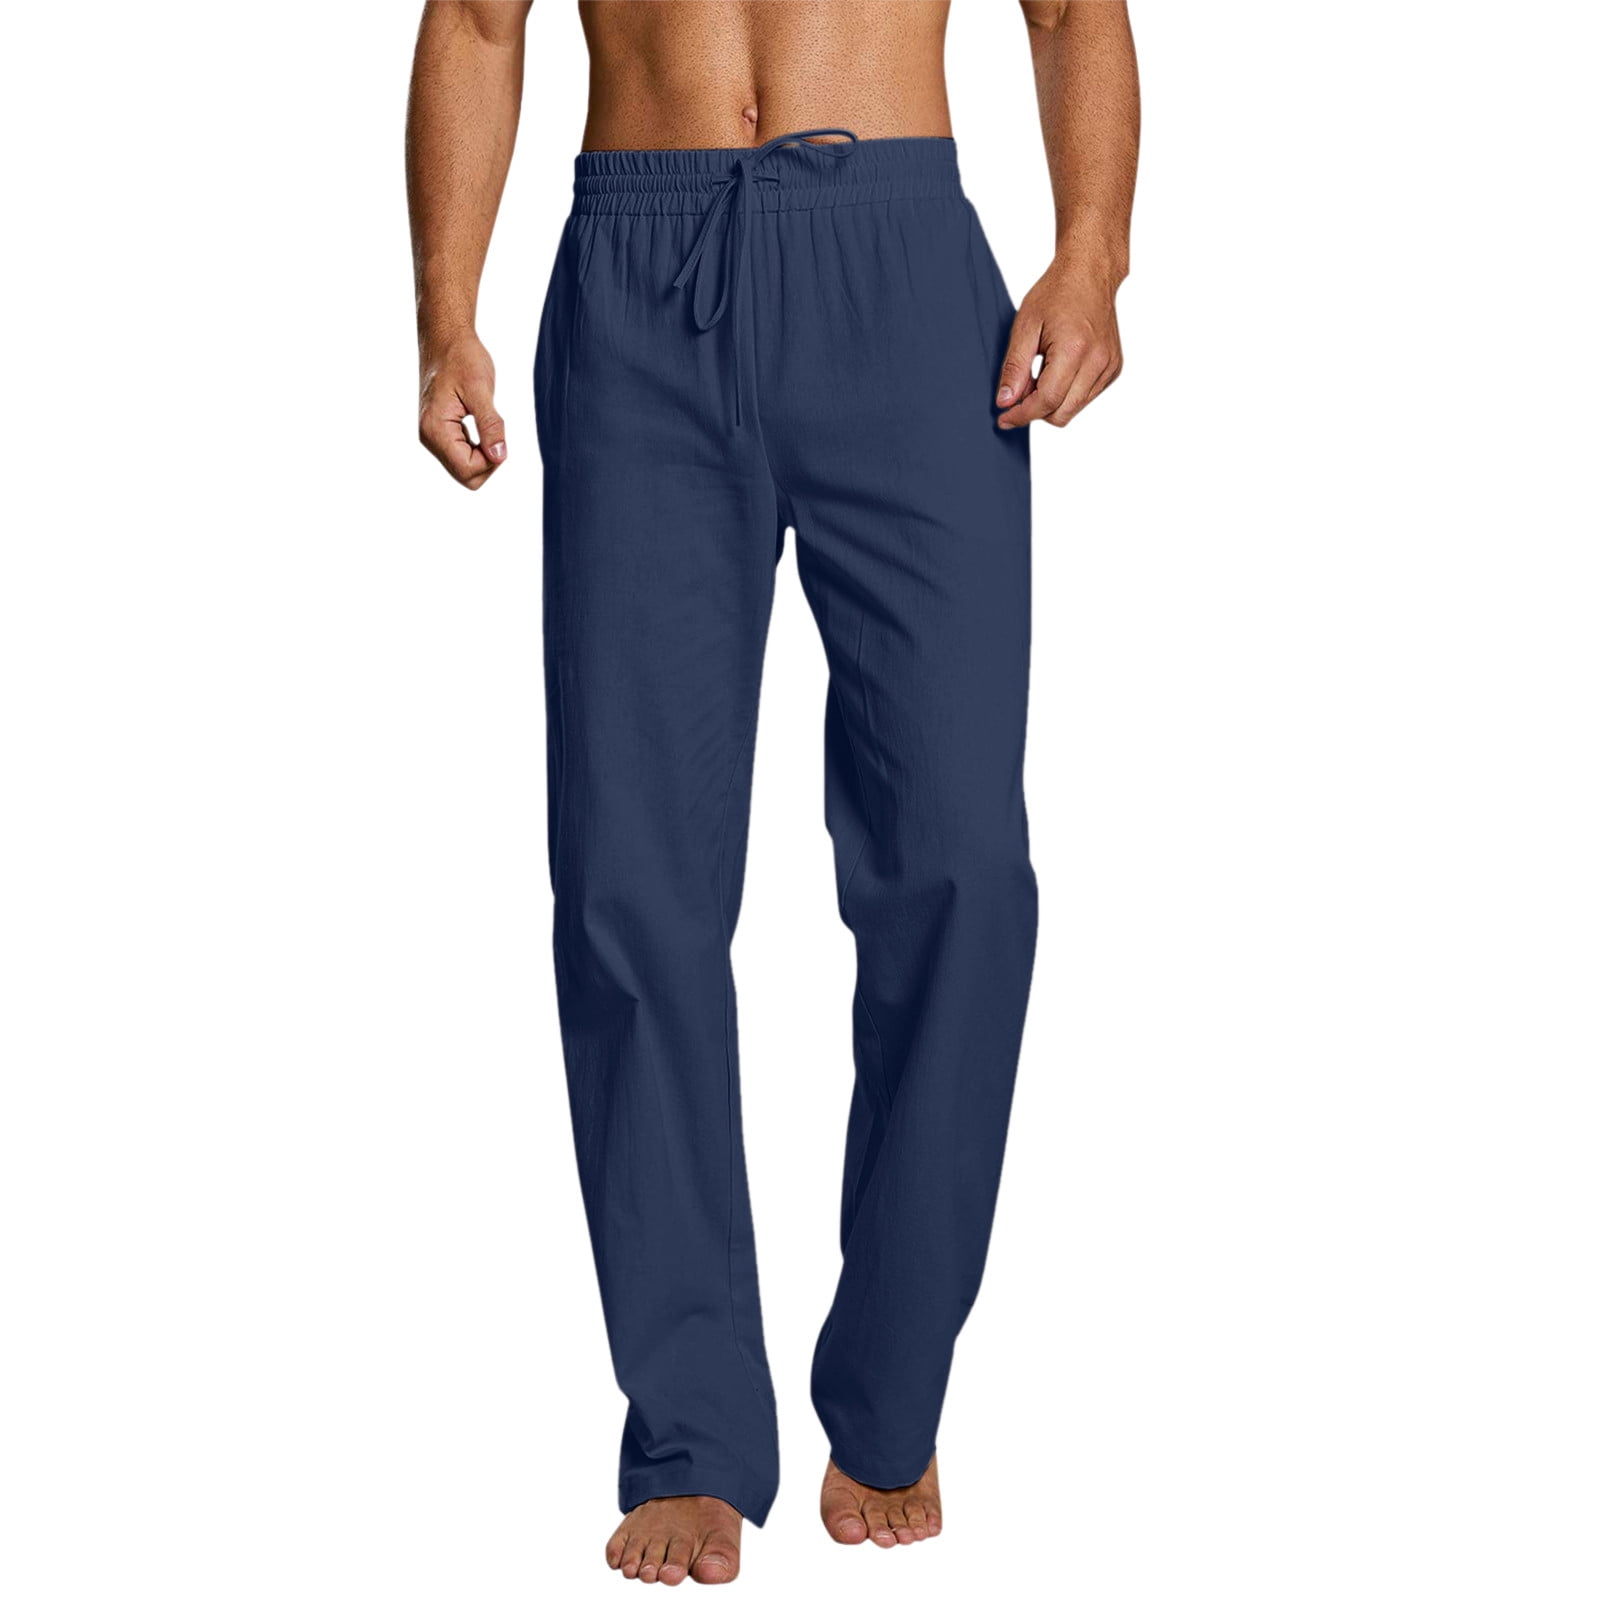 Pedort Men's Running Pants Men's Relaxed Fit Cargo Big and Tall Sizes ...